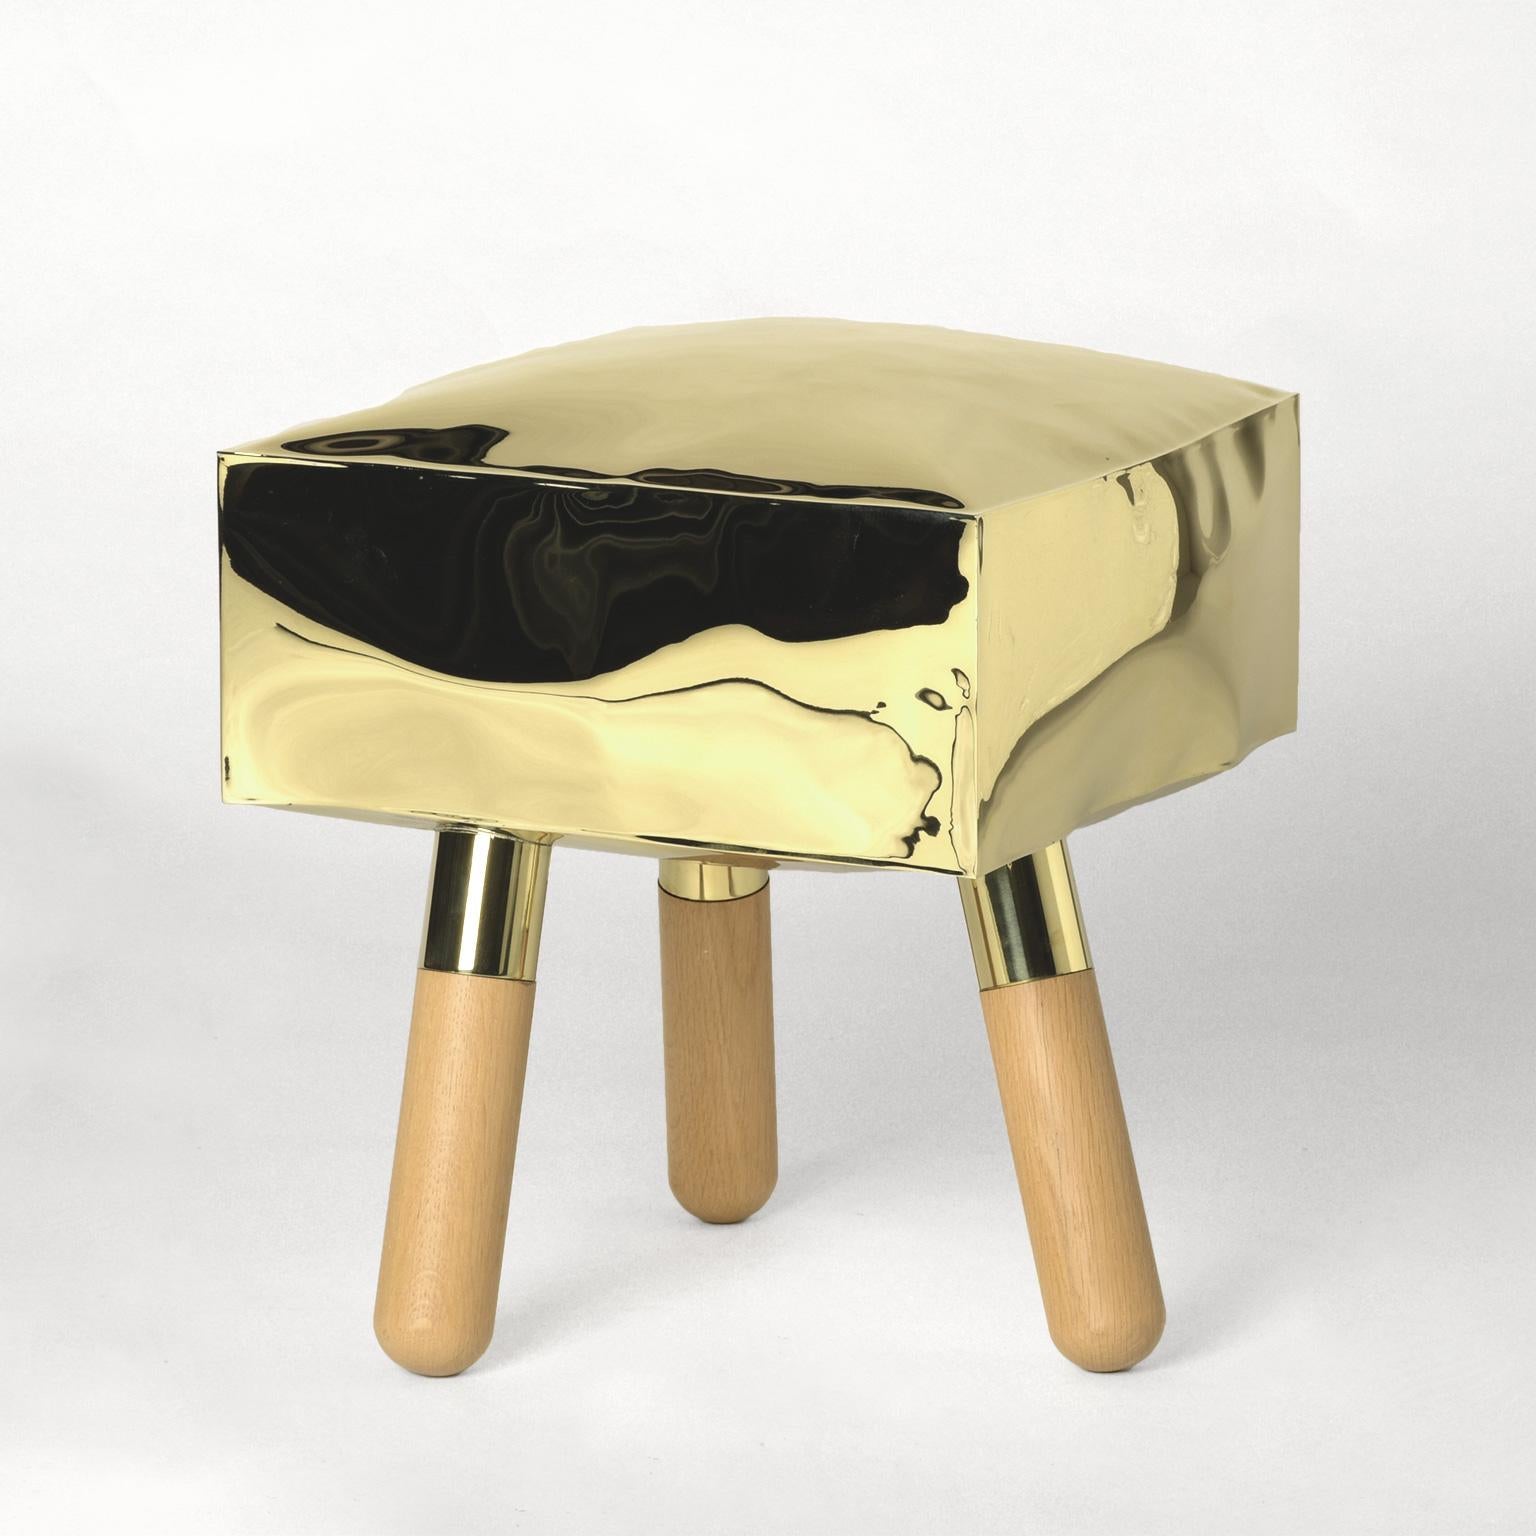 Contemporary Limited Edition Wood Brass Stool, Icenine V1 by Edizione Limitata 2